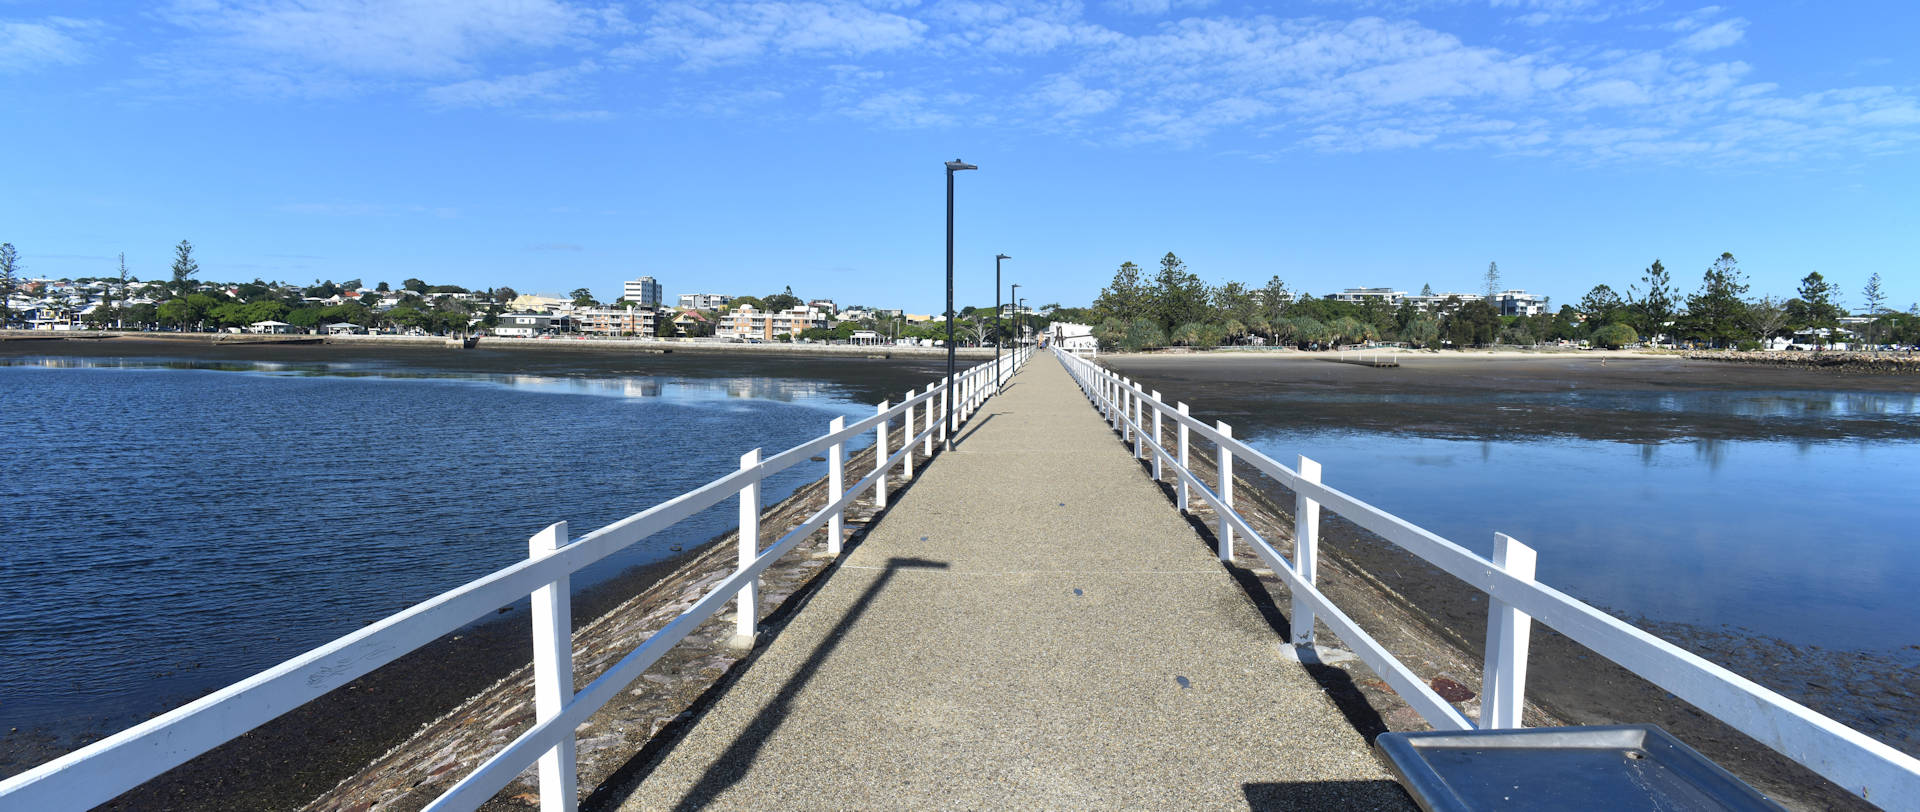 View from Wynnum Jetty, looking back to the shore from the end of the jetty